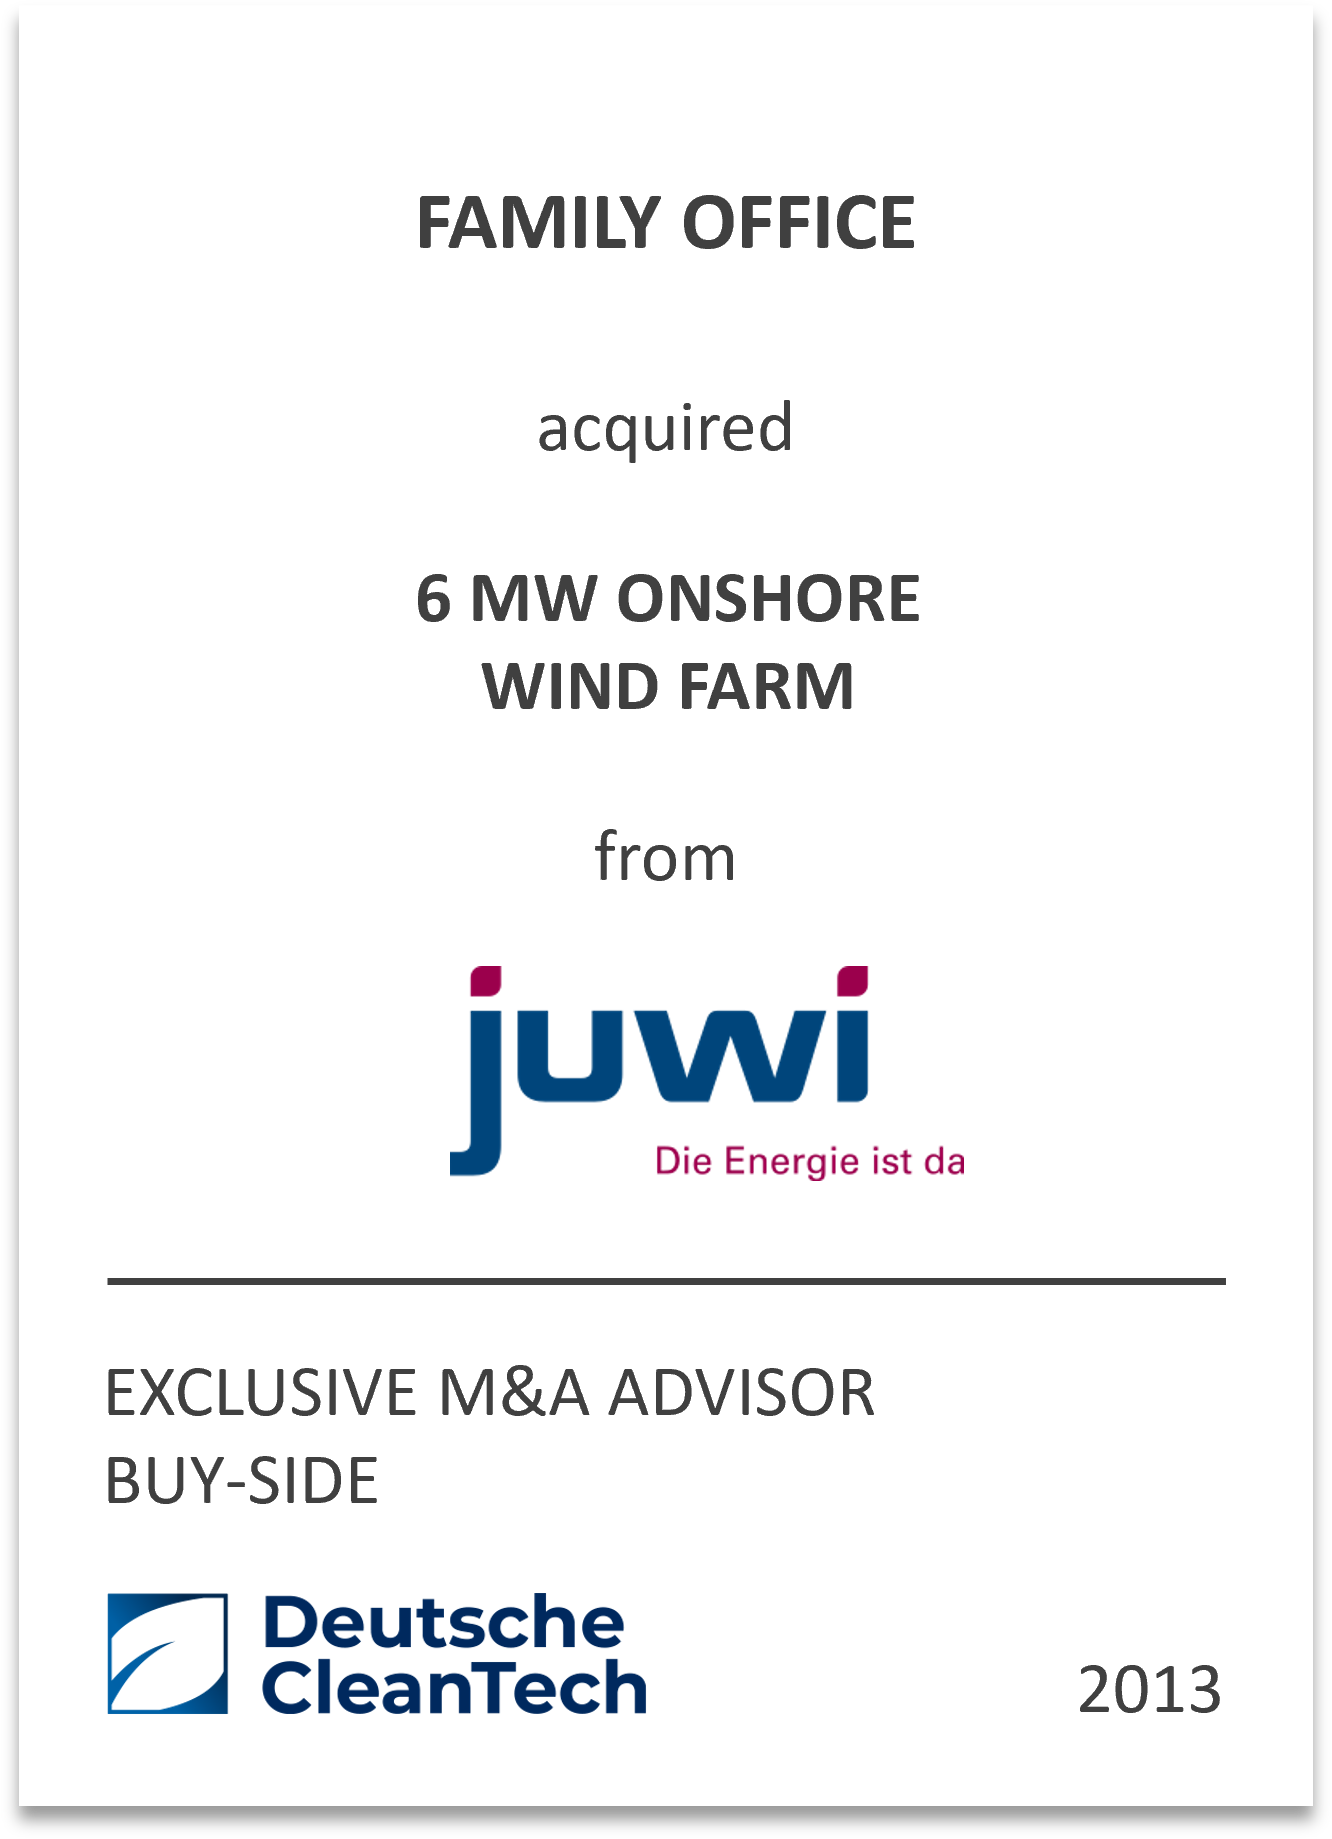 A German family office acquires a 6 MW onshore wind farm in Germany from a consortium led by wind farm developer juwi